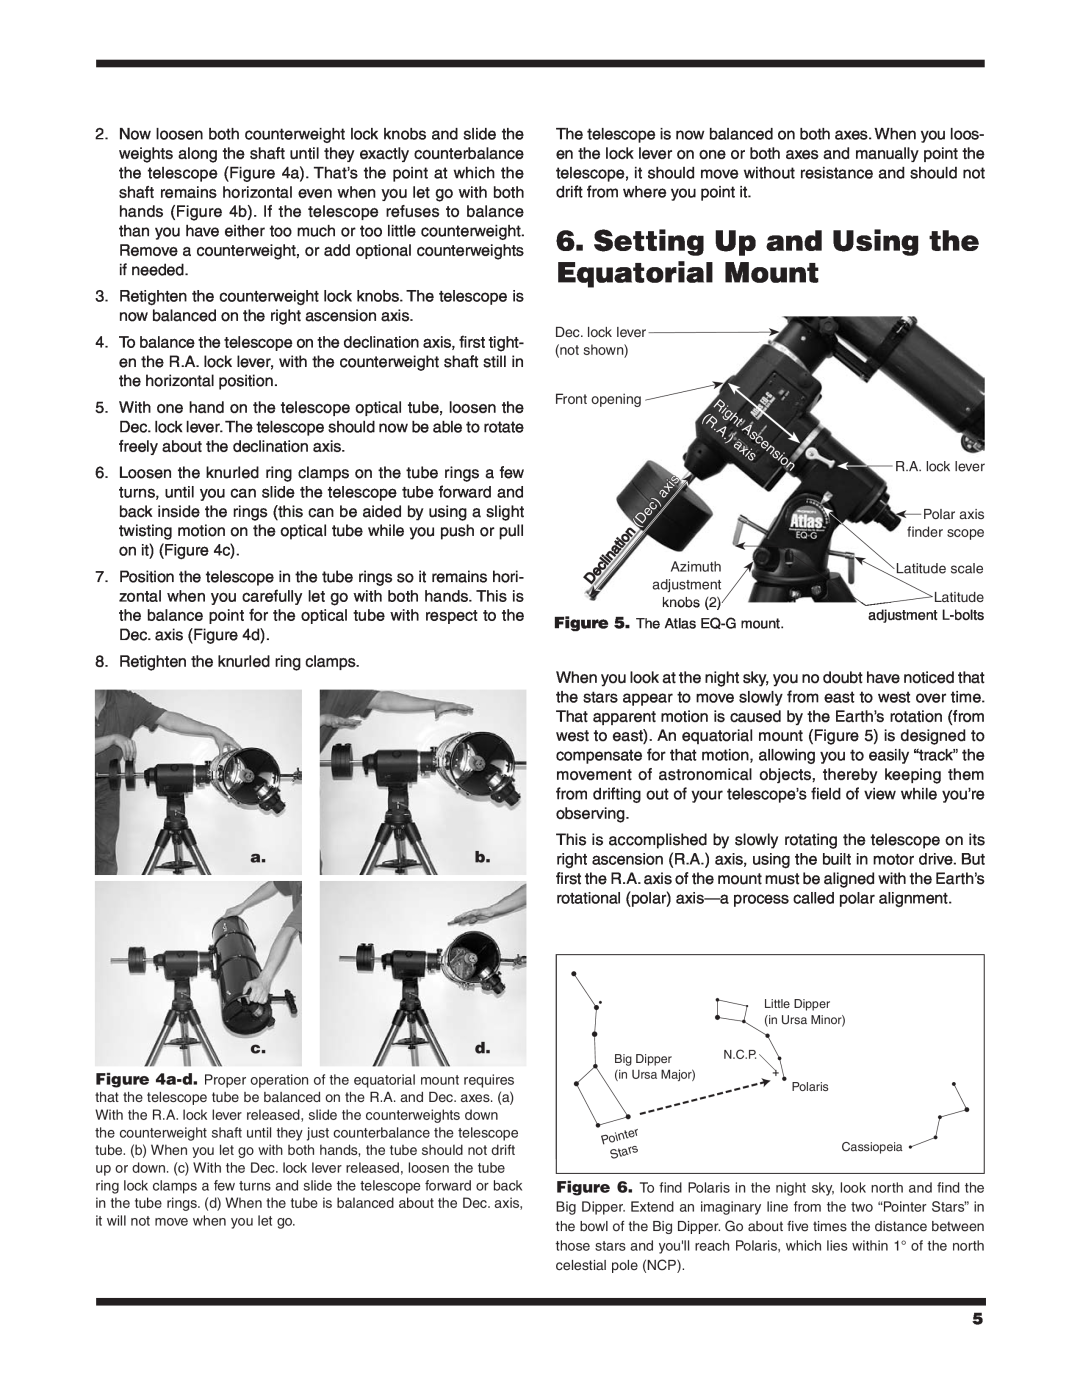 Orion EQ-G instruction manual Setting Up and Using the Equatorial Mount, RRight, axis, a.b c.d 